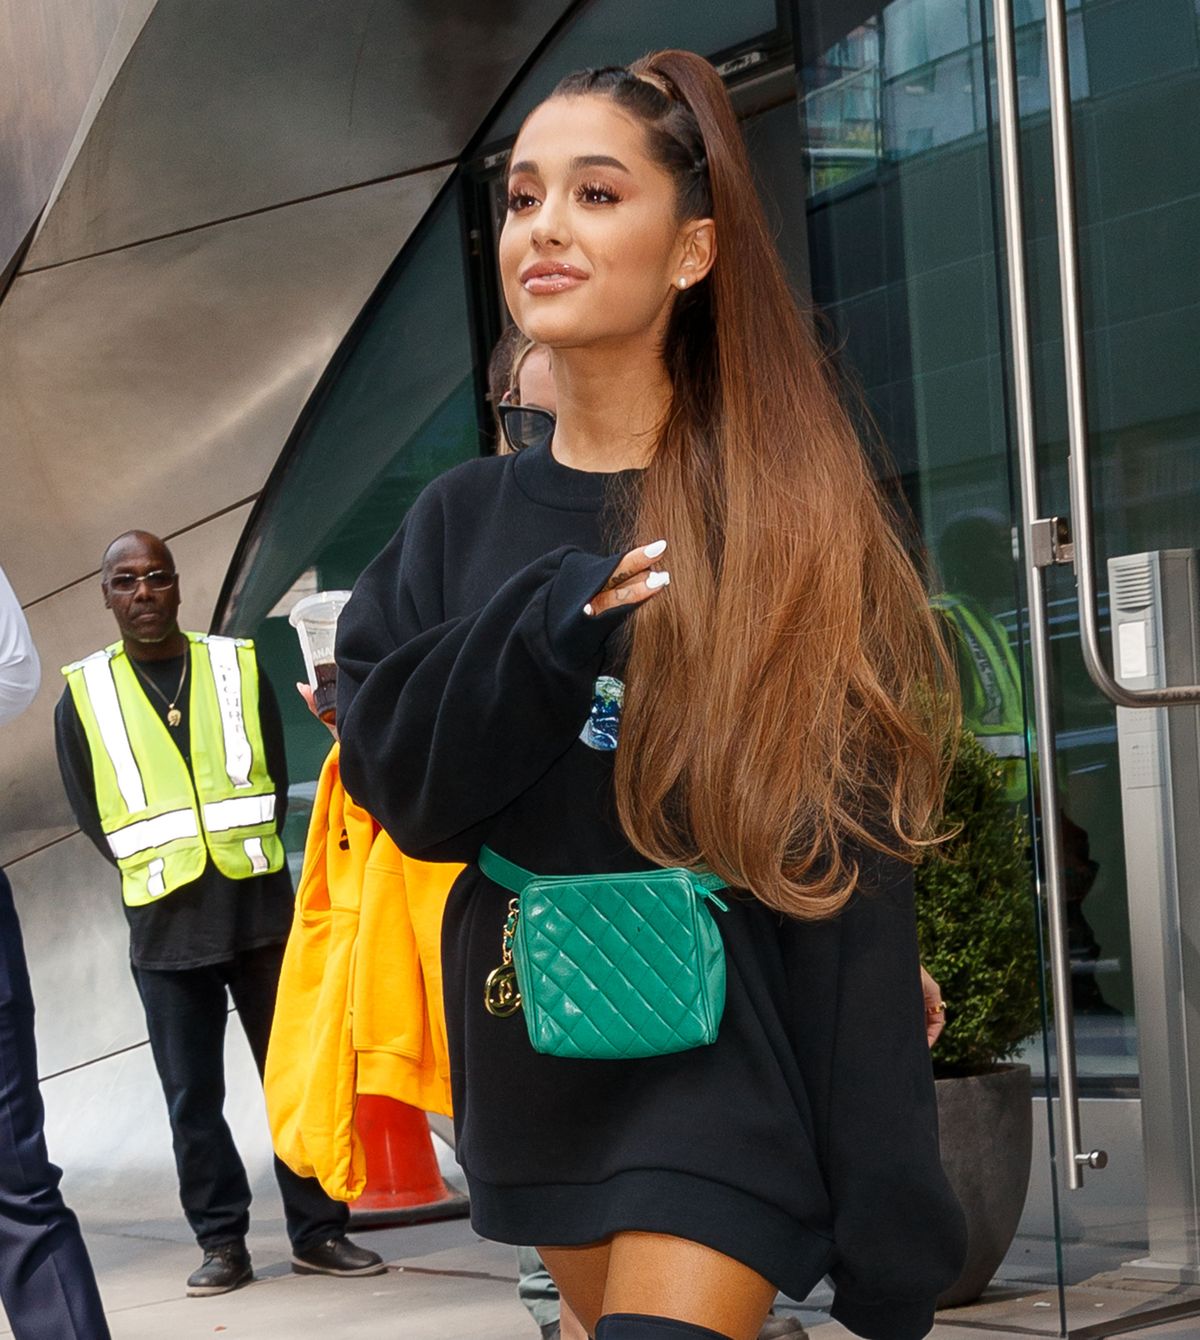 indgang Skygge chef Ariana Grande's Style Helped Searches for Oversized Hoodies Increase 130%